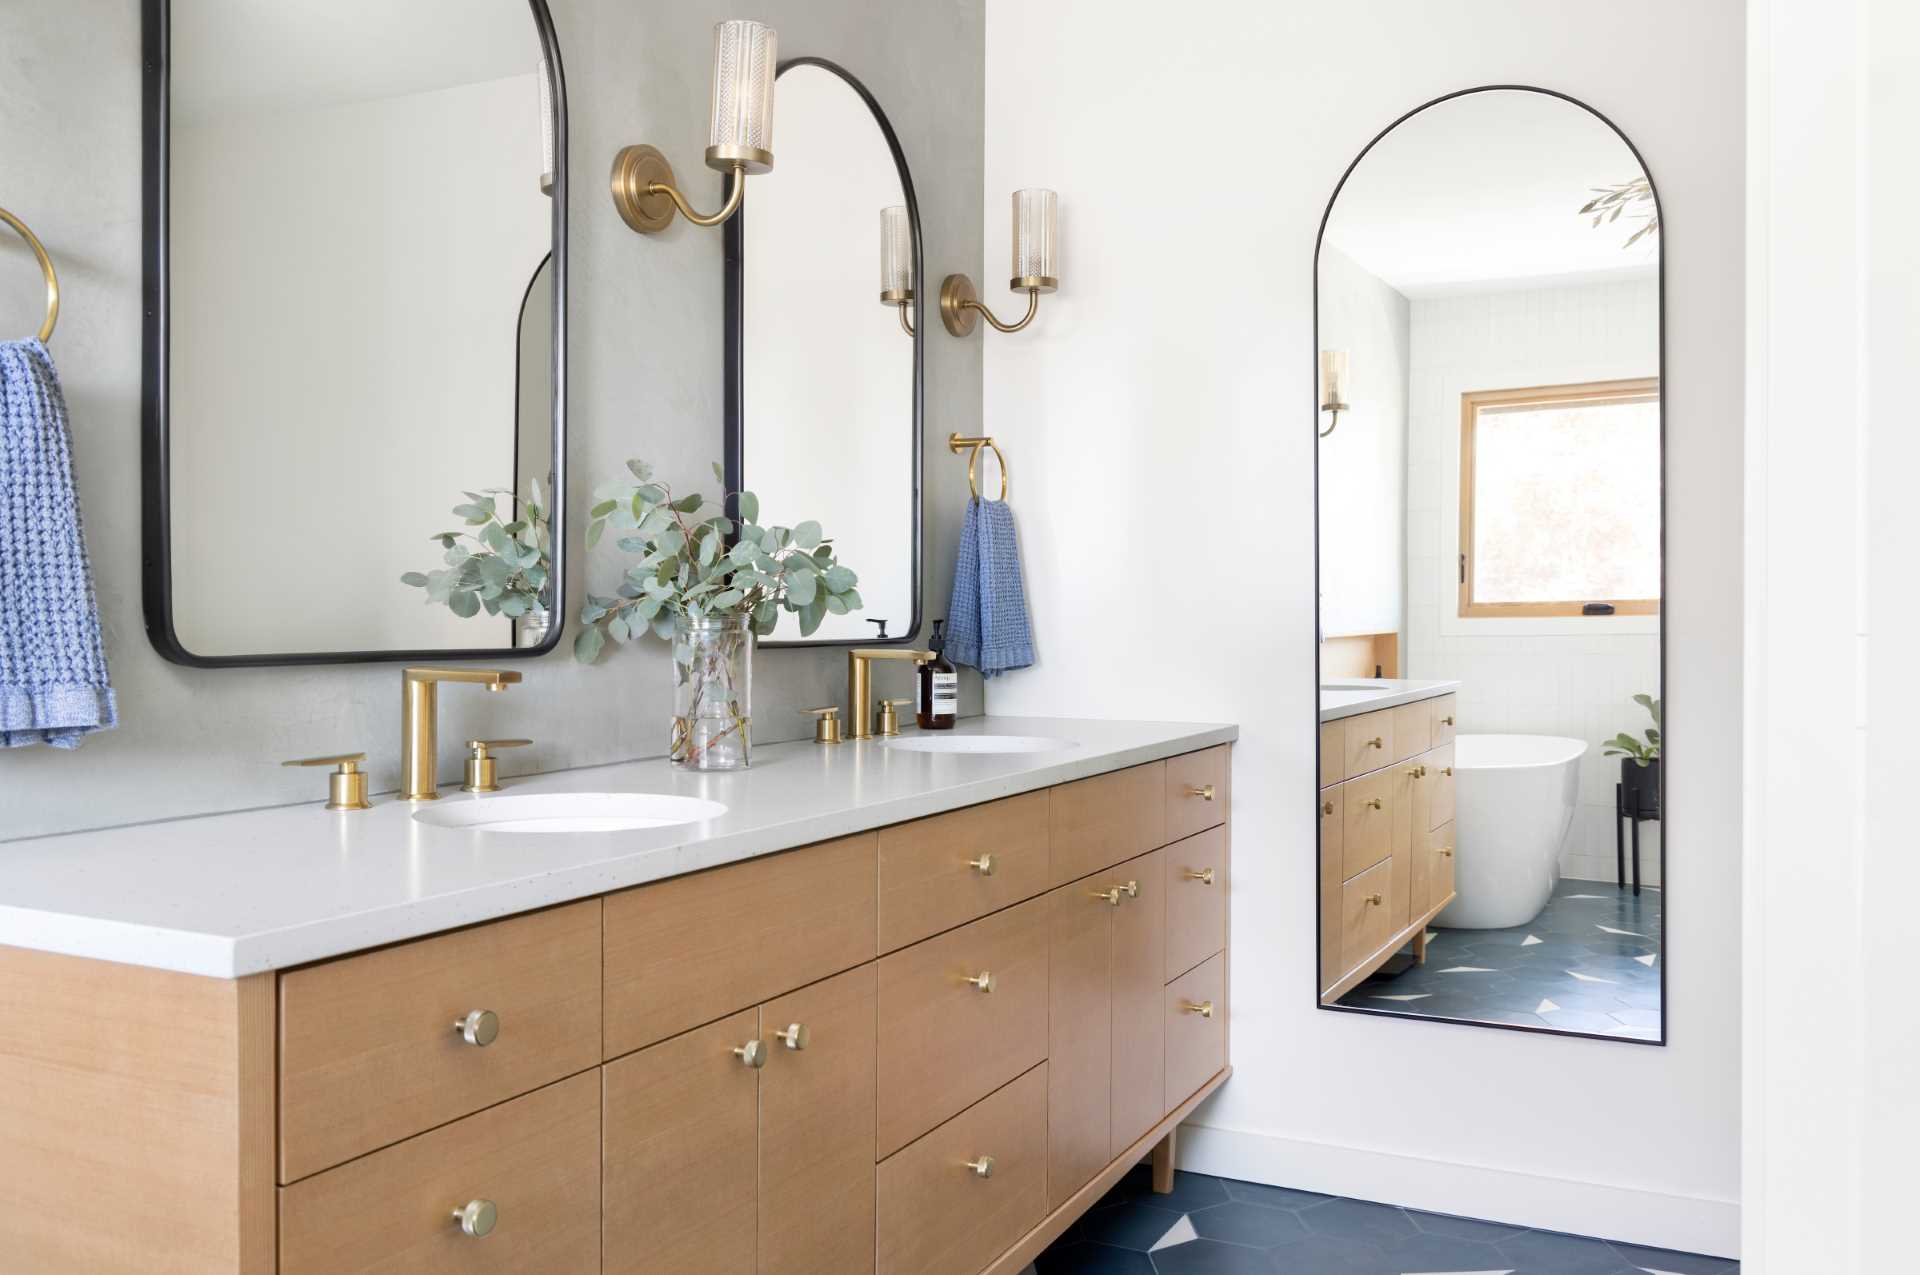 This ensuite bathroom includes a mid-century modern inspired tile flooring, a walk-in shower with a bench, white tiled walls, a freestanding bathtub with wood shelving niche, and a wood vanity.